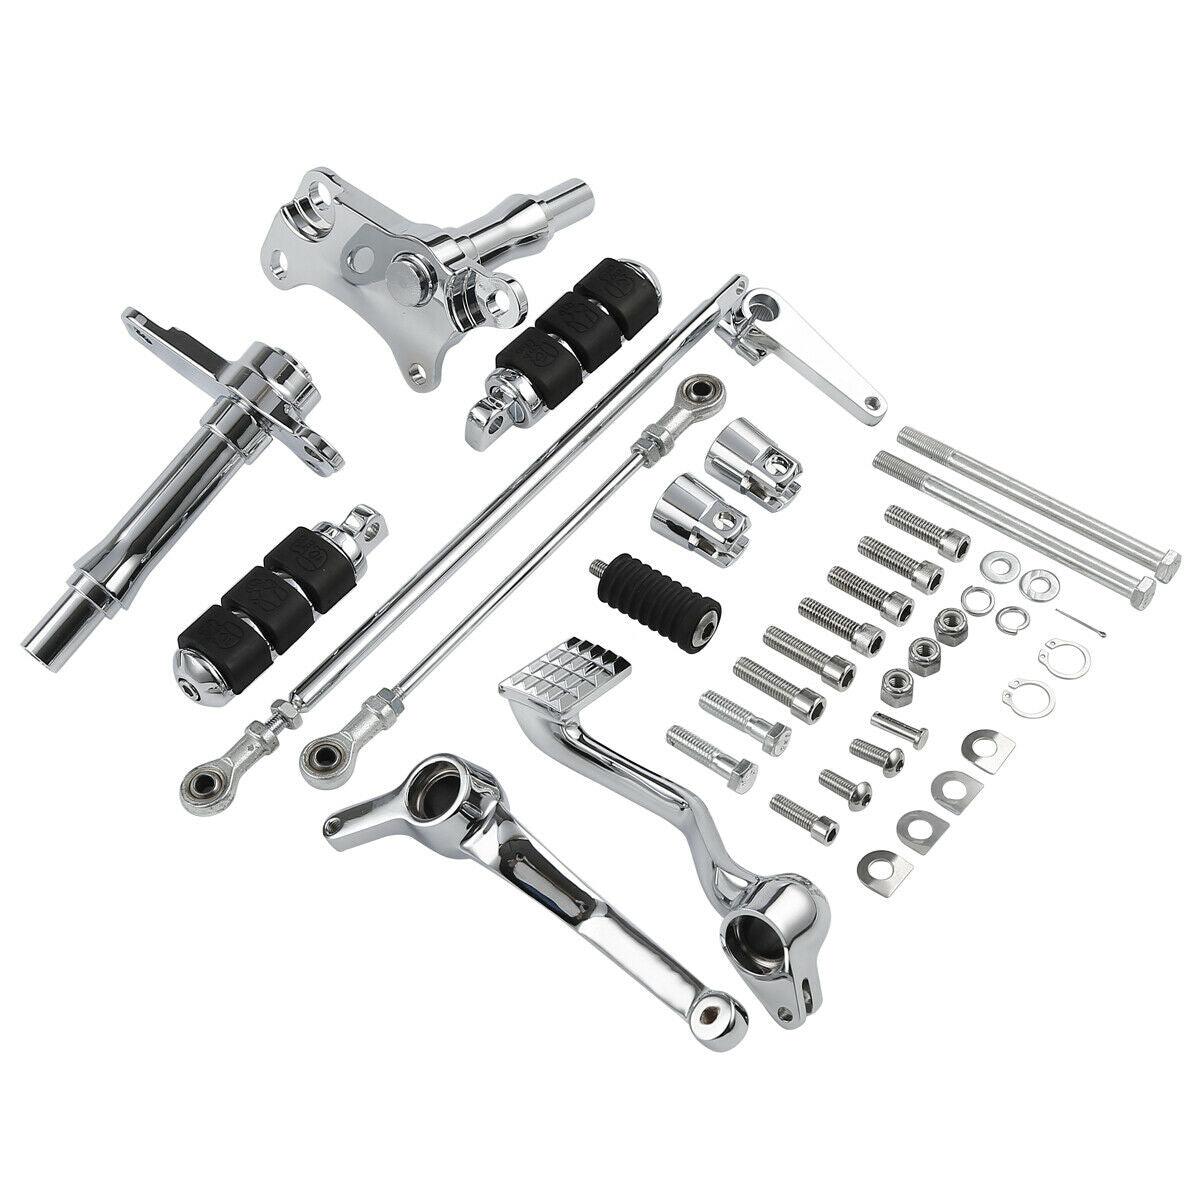 Forward Controls Pegs Levers Linkage Fit For Harley Sportster 1200 883 91-03 US - Moto Life Products